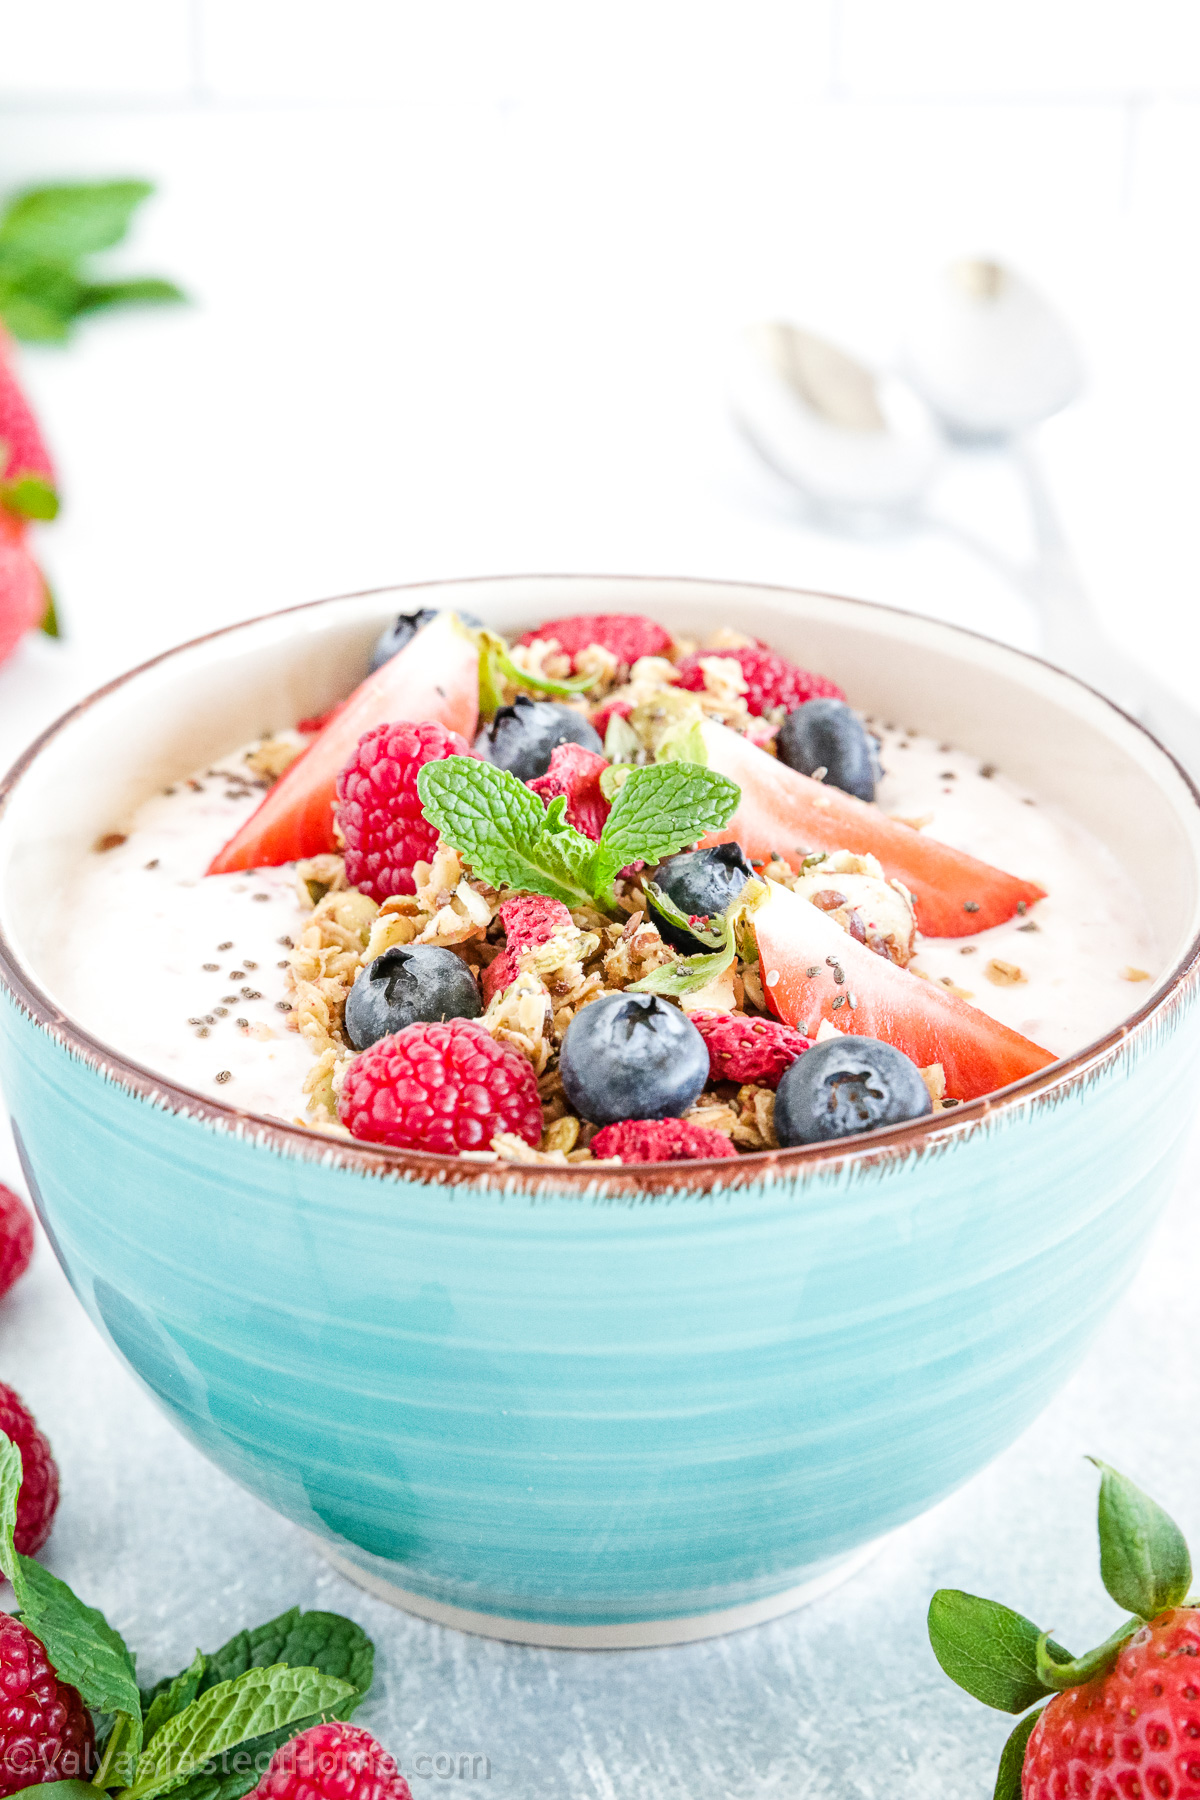 Yogurt with granola is exactly what it sounds like: delicious, crunchy granola topped with Greek yogurt and fruits for an incredibly delicious breakfast.